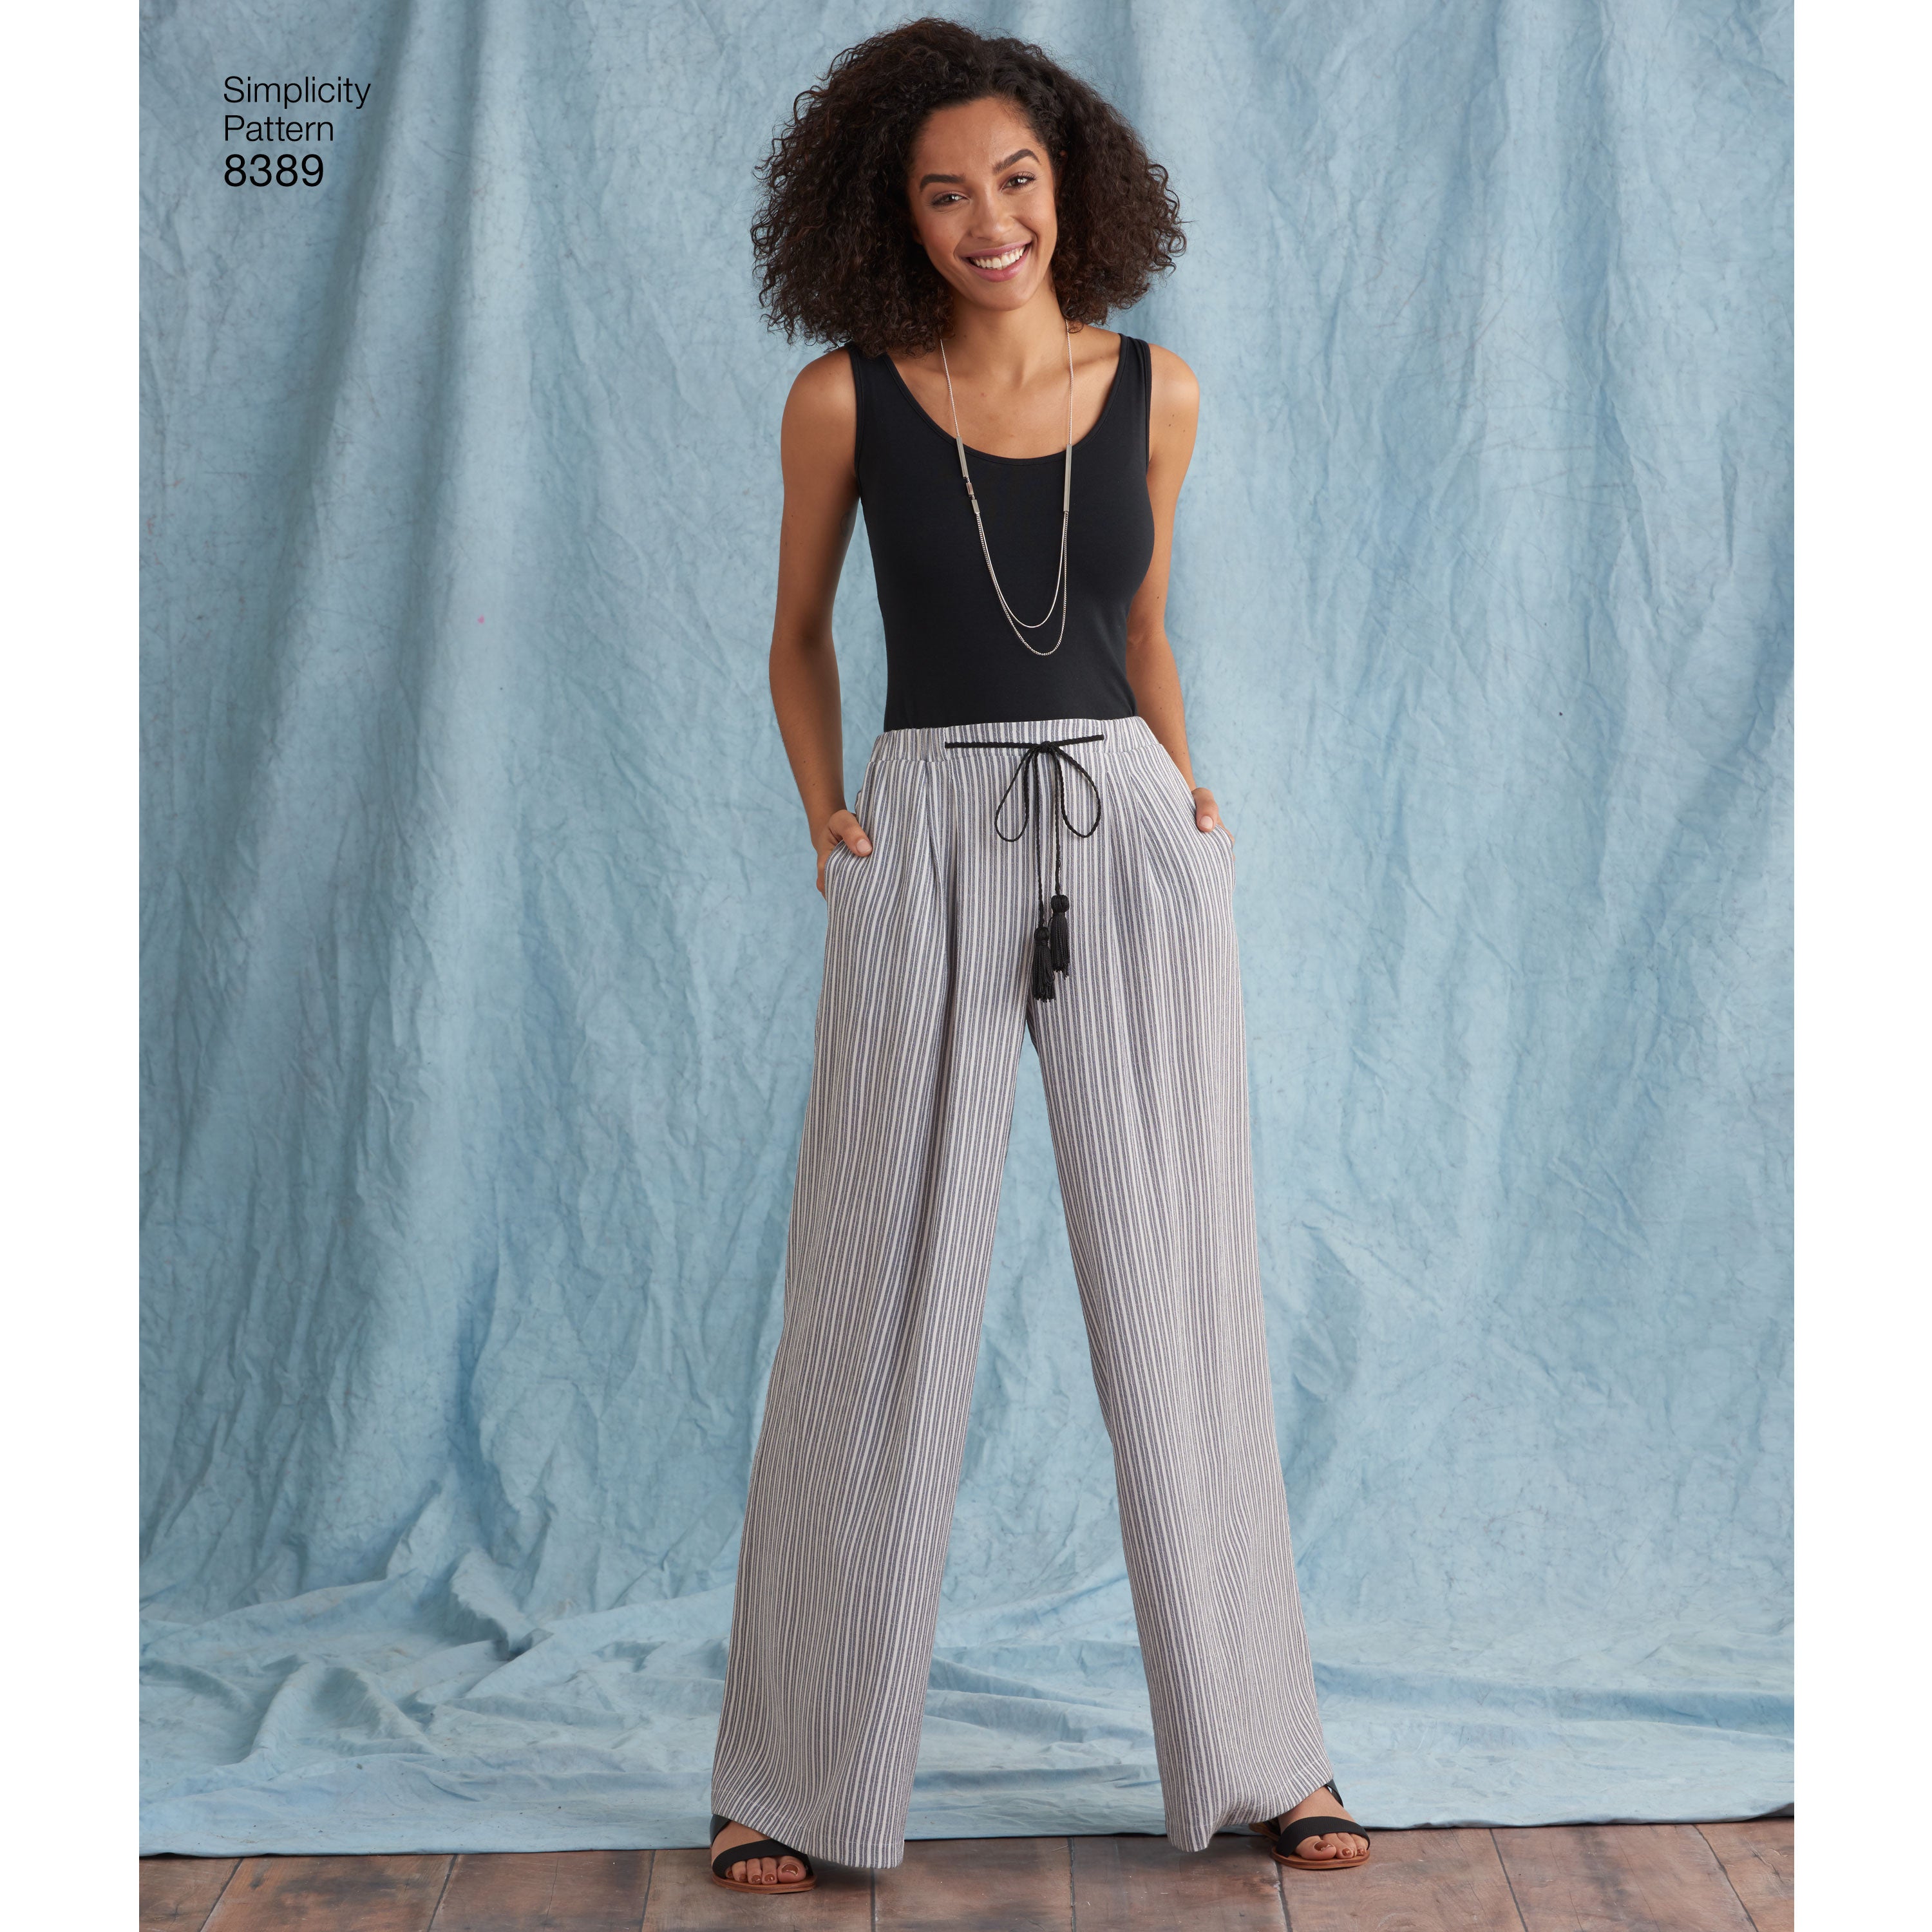 High Waist Pants Sewing Pattern  Wardrobe By Me  We love sewing